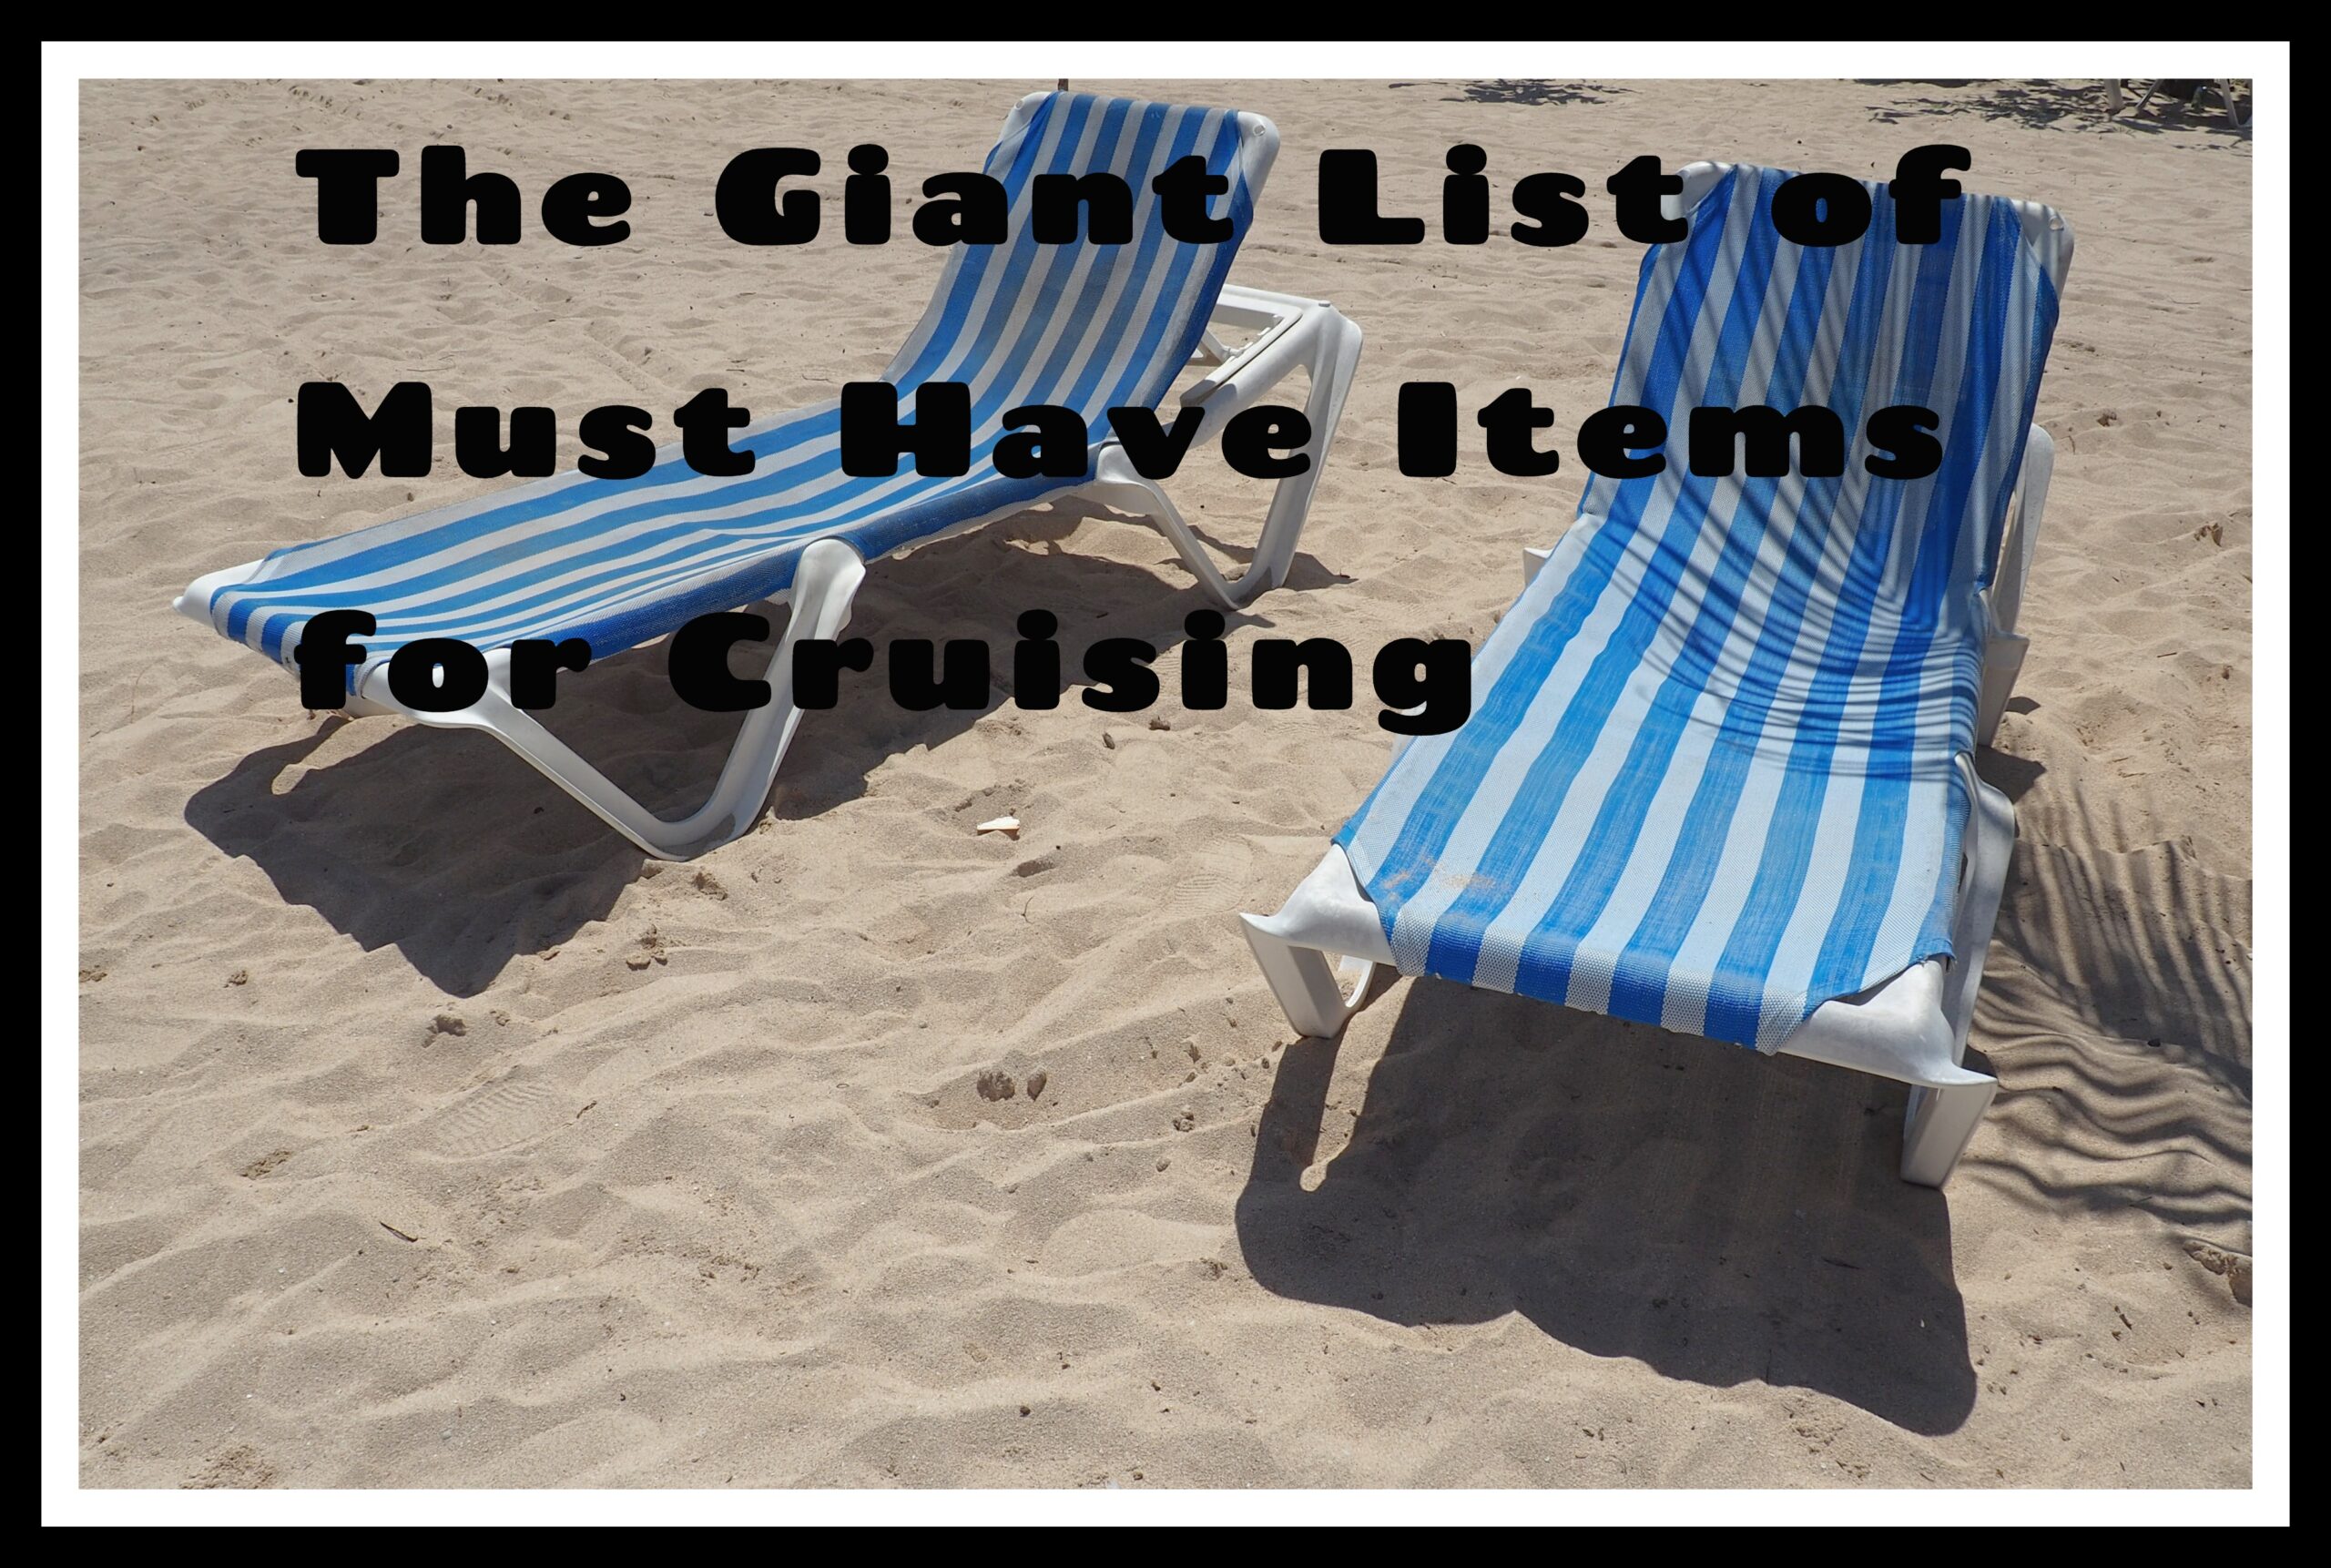 The Giant List of Must Have Items for Cruising